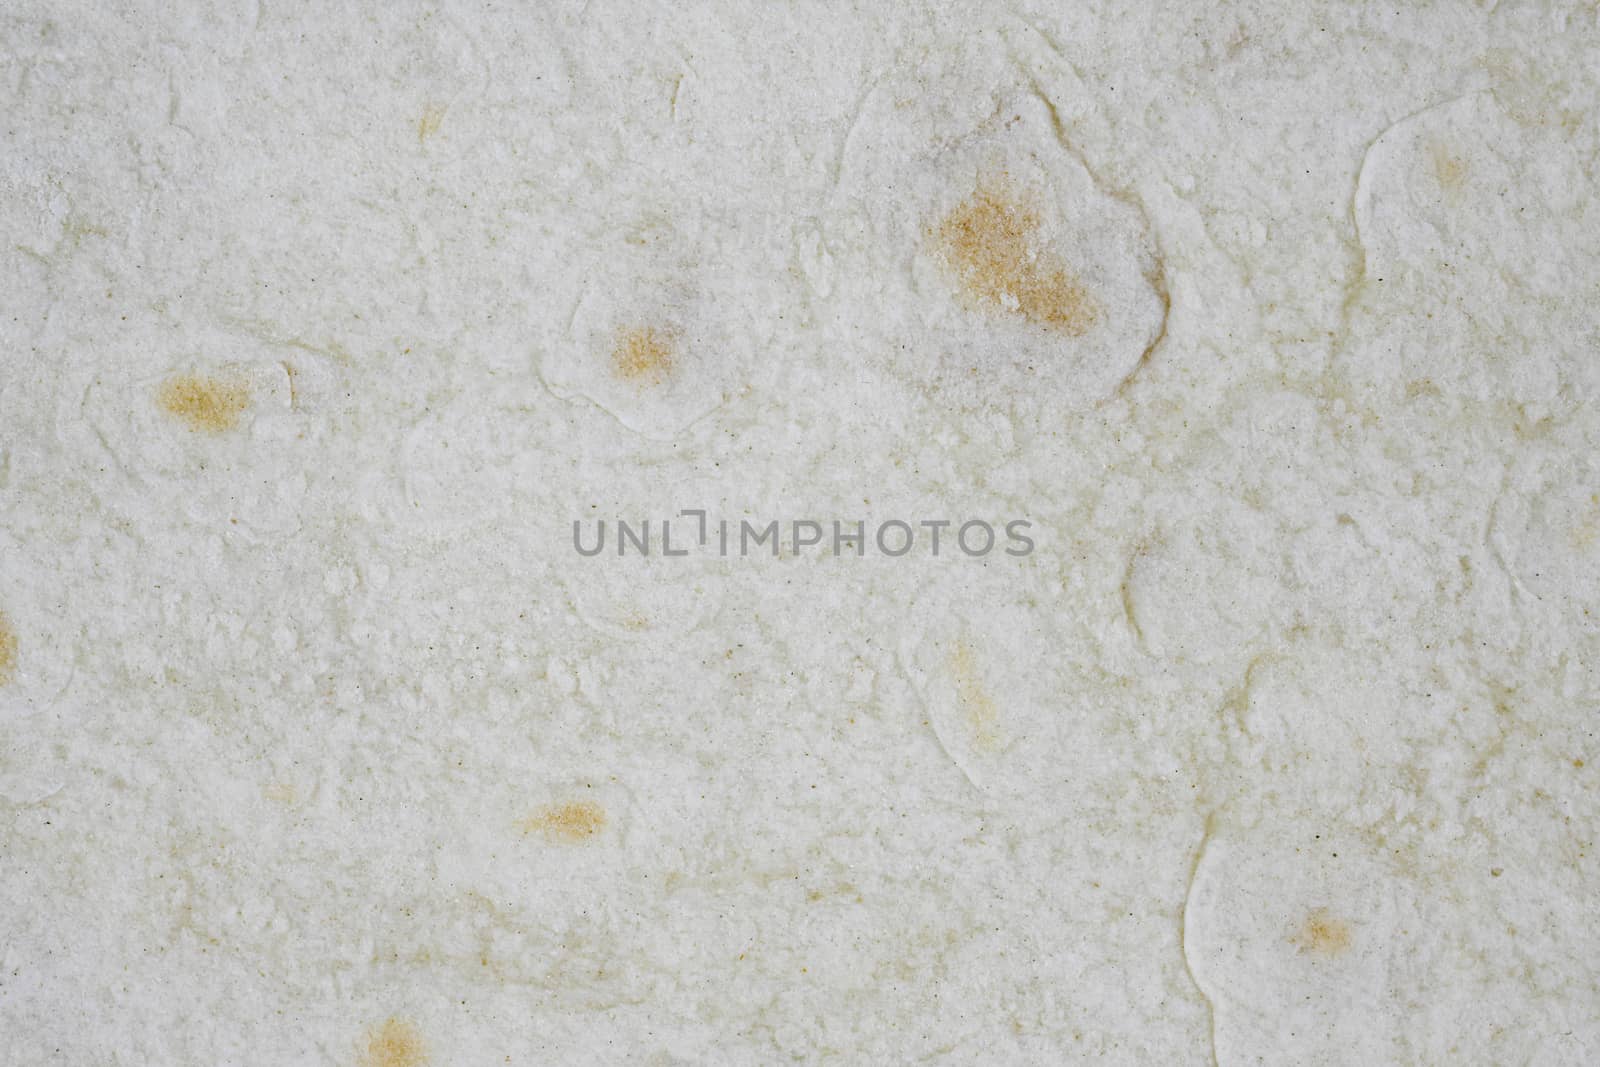 Texture of thin traditional freshly baked homemade oriental bread. Close-up Armenian pita bread - lavash as a textured bread background. by sashokddt